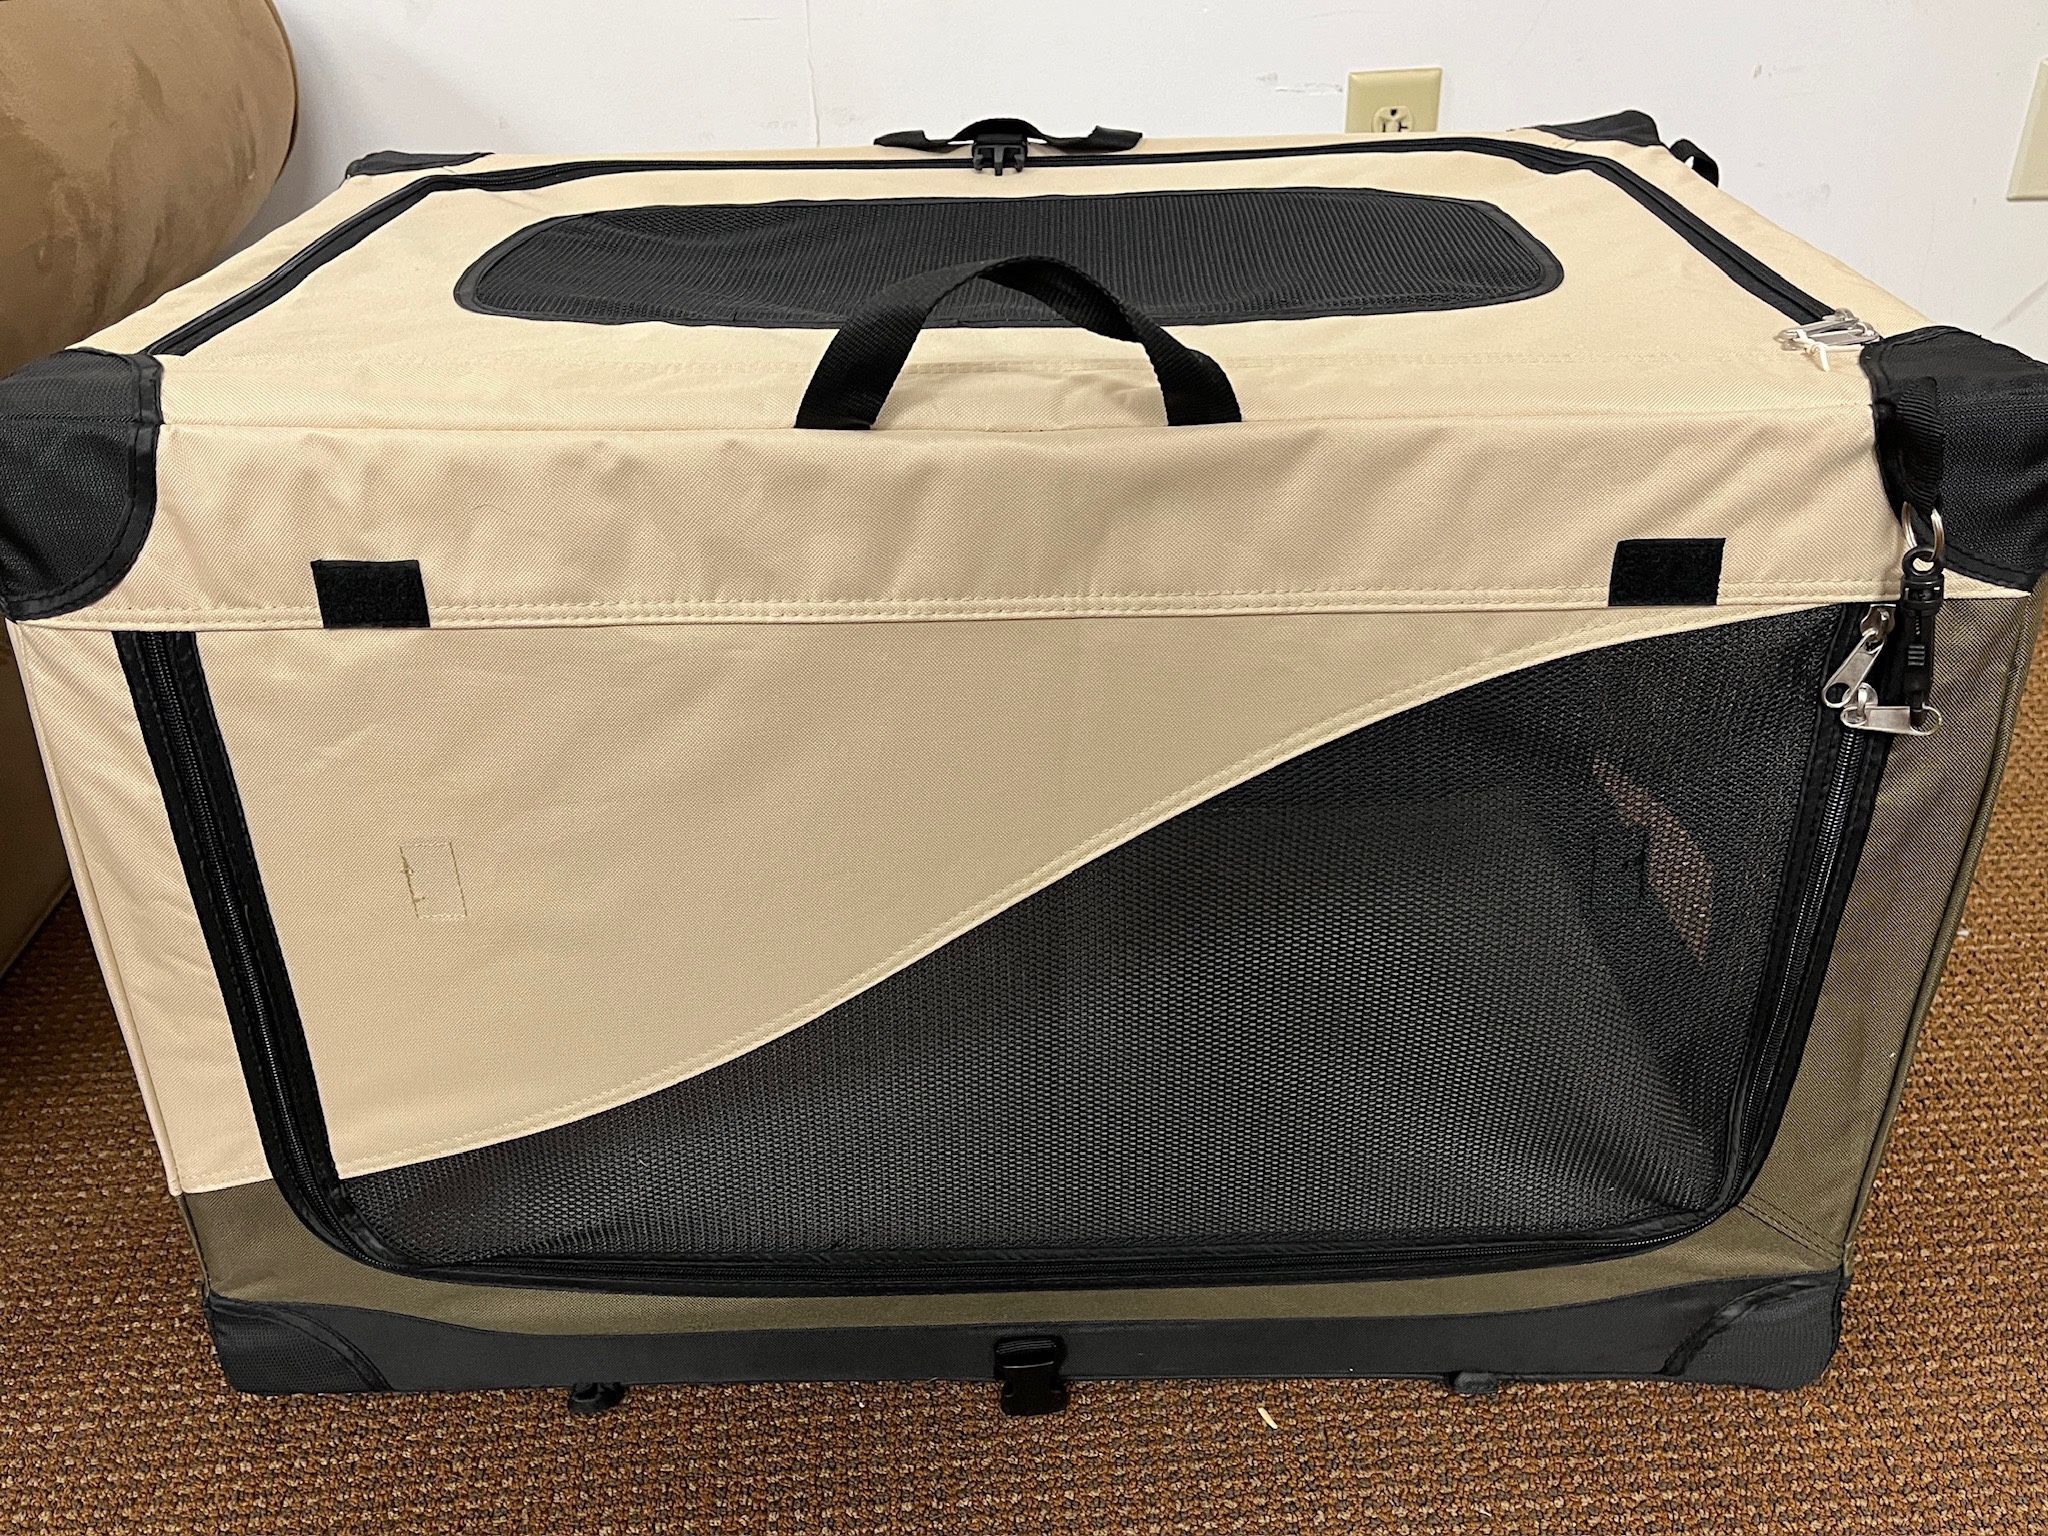 EveryYay Going Places Stow & Go Portable Canvas Dog Crate, 30" L X 20" W X 19" H. See Pics